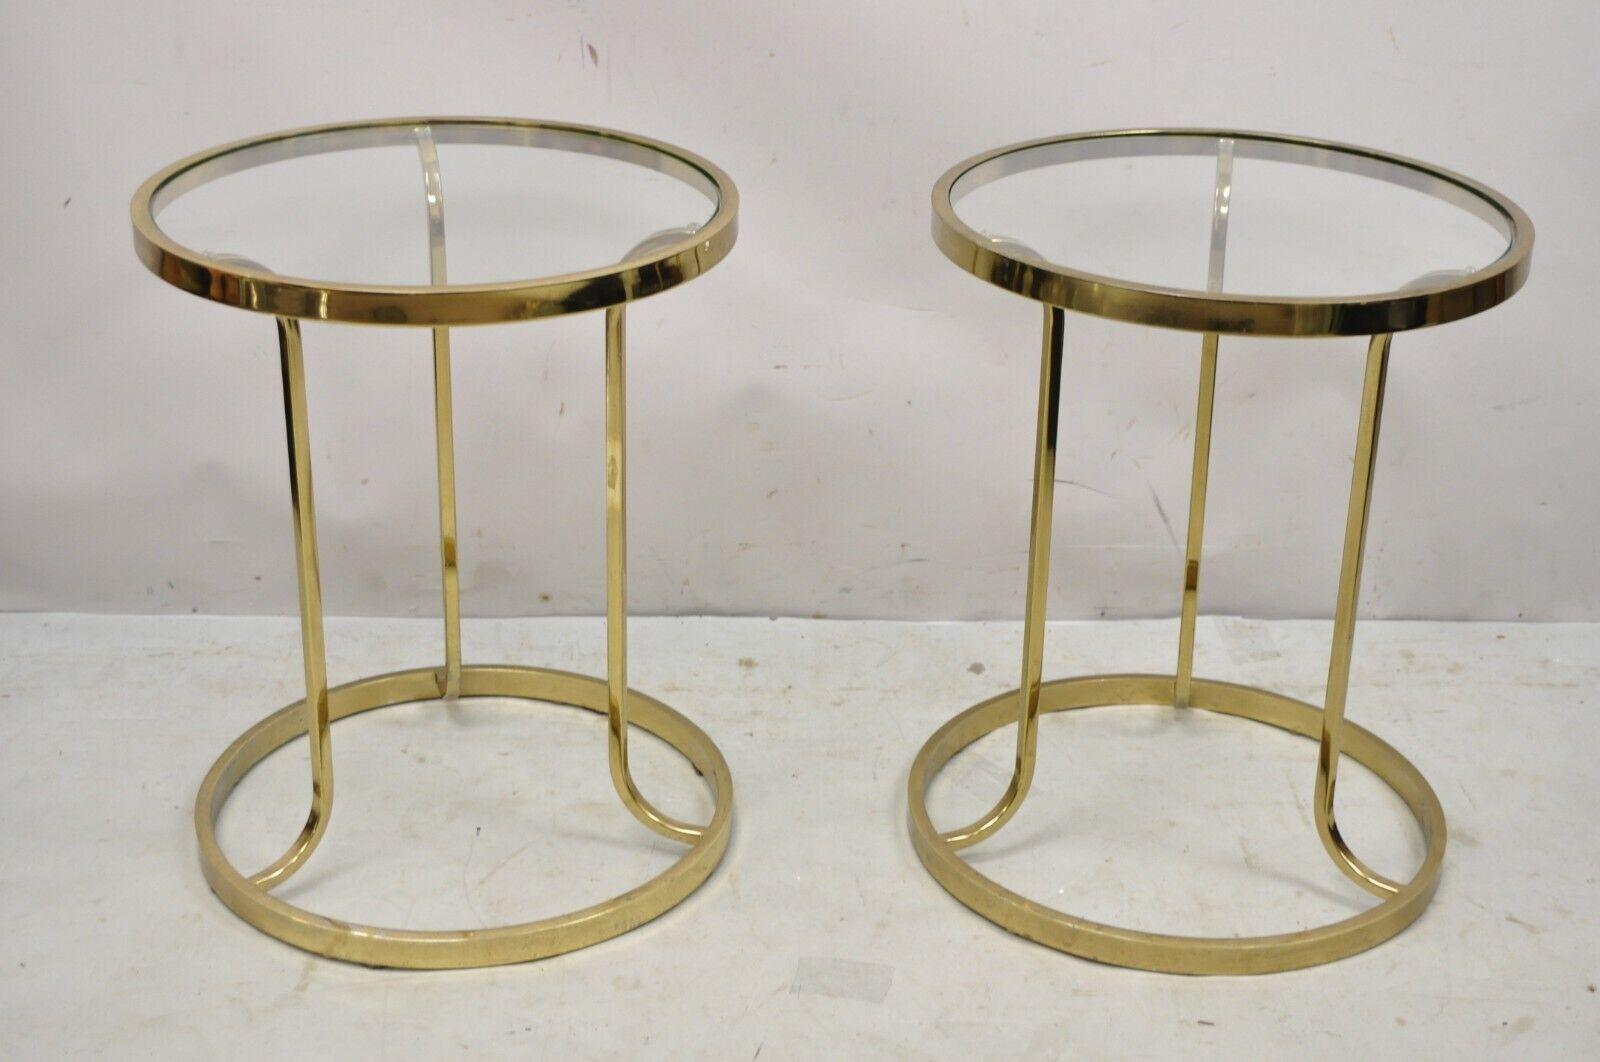 Vintage Midcentury Gold Brass Metal Baughman Style Round Side Tables, a Pair For Sale 4